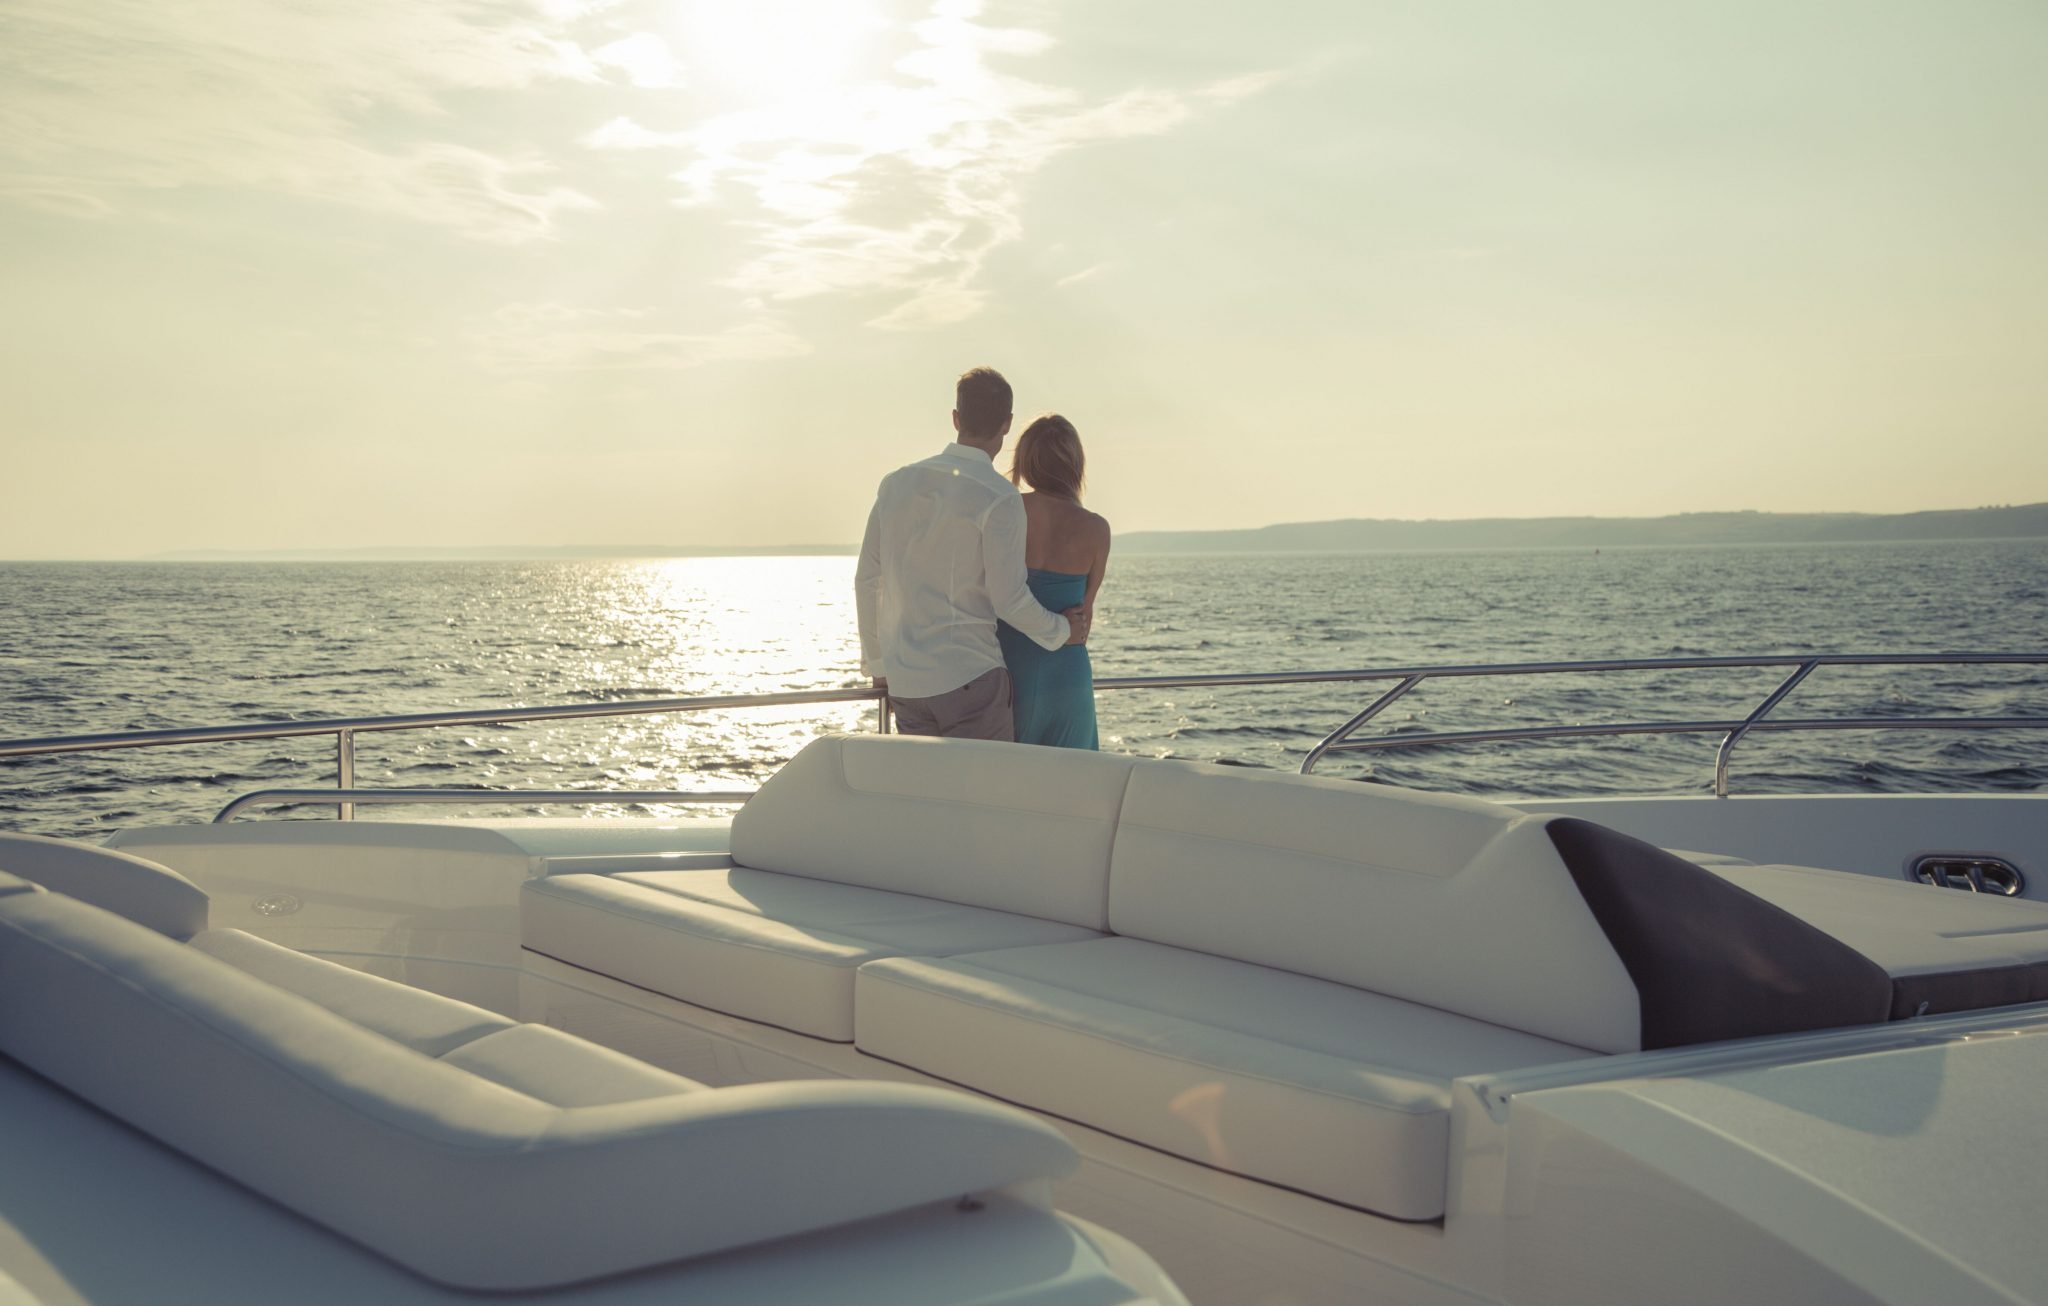 5 Reasons Why Yachting Will Thrive in the New COVID Economy